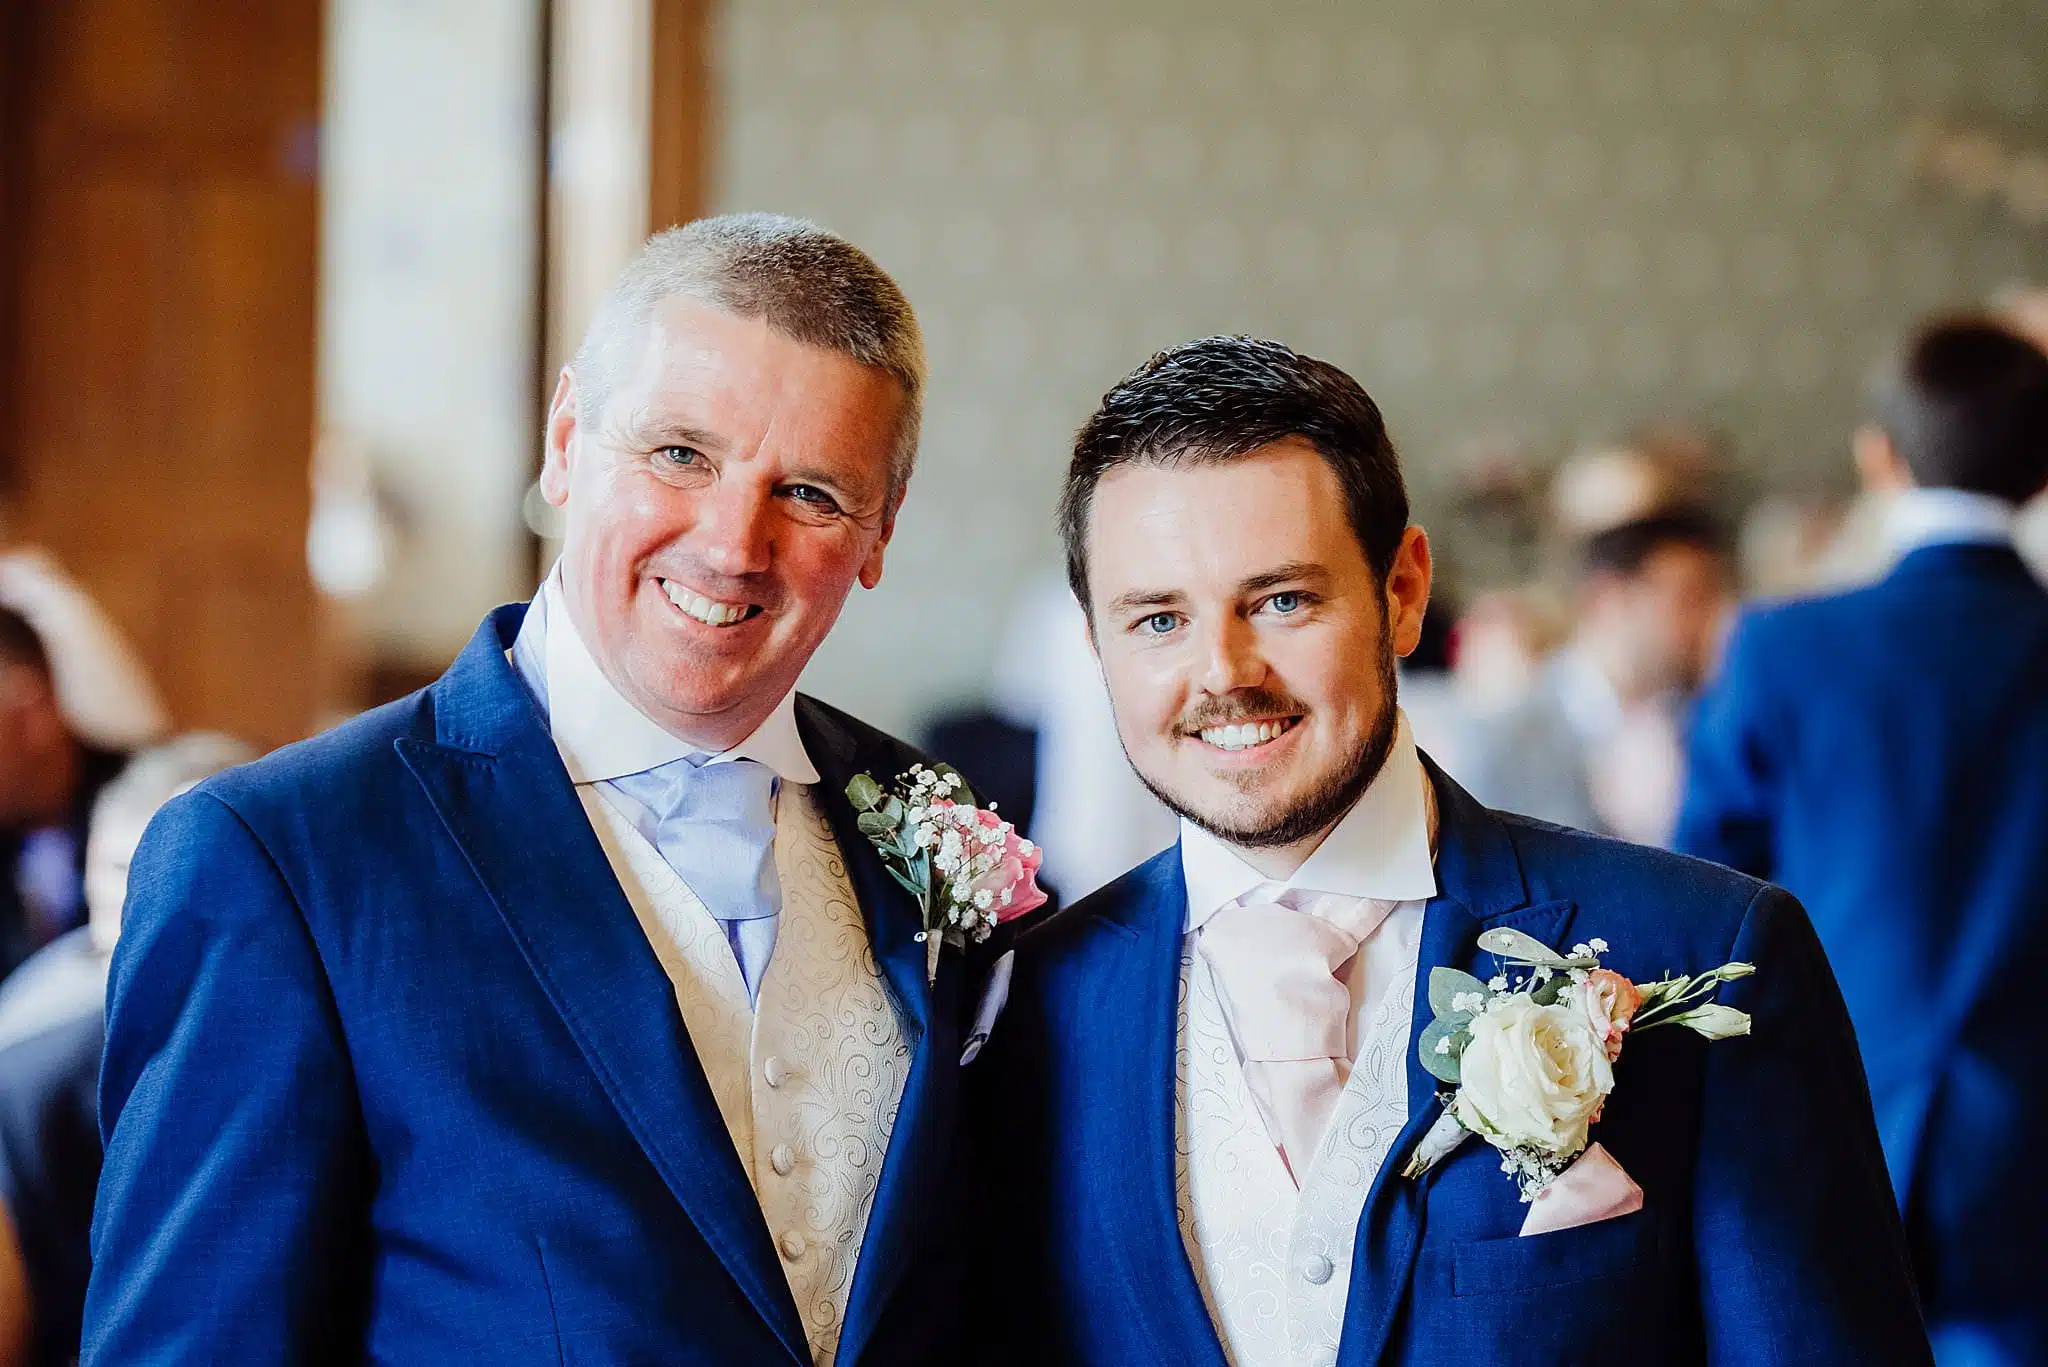 A smiling groom and his best man at a wedding ceremony at Gregnog Hall